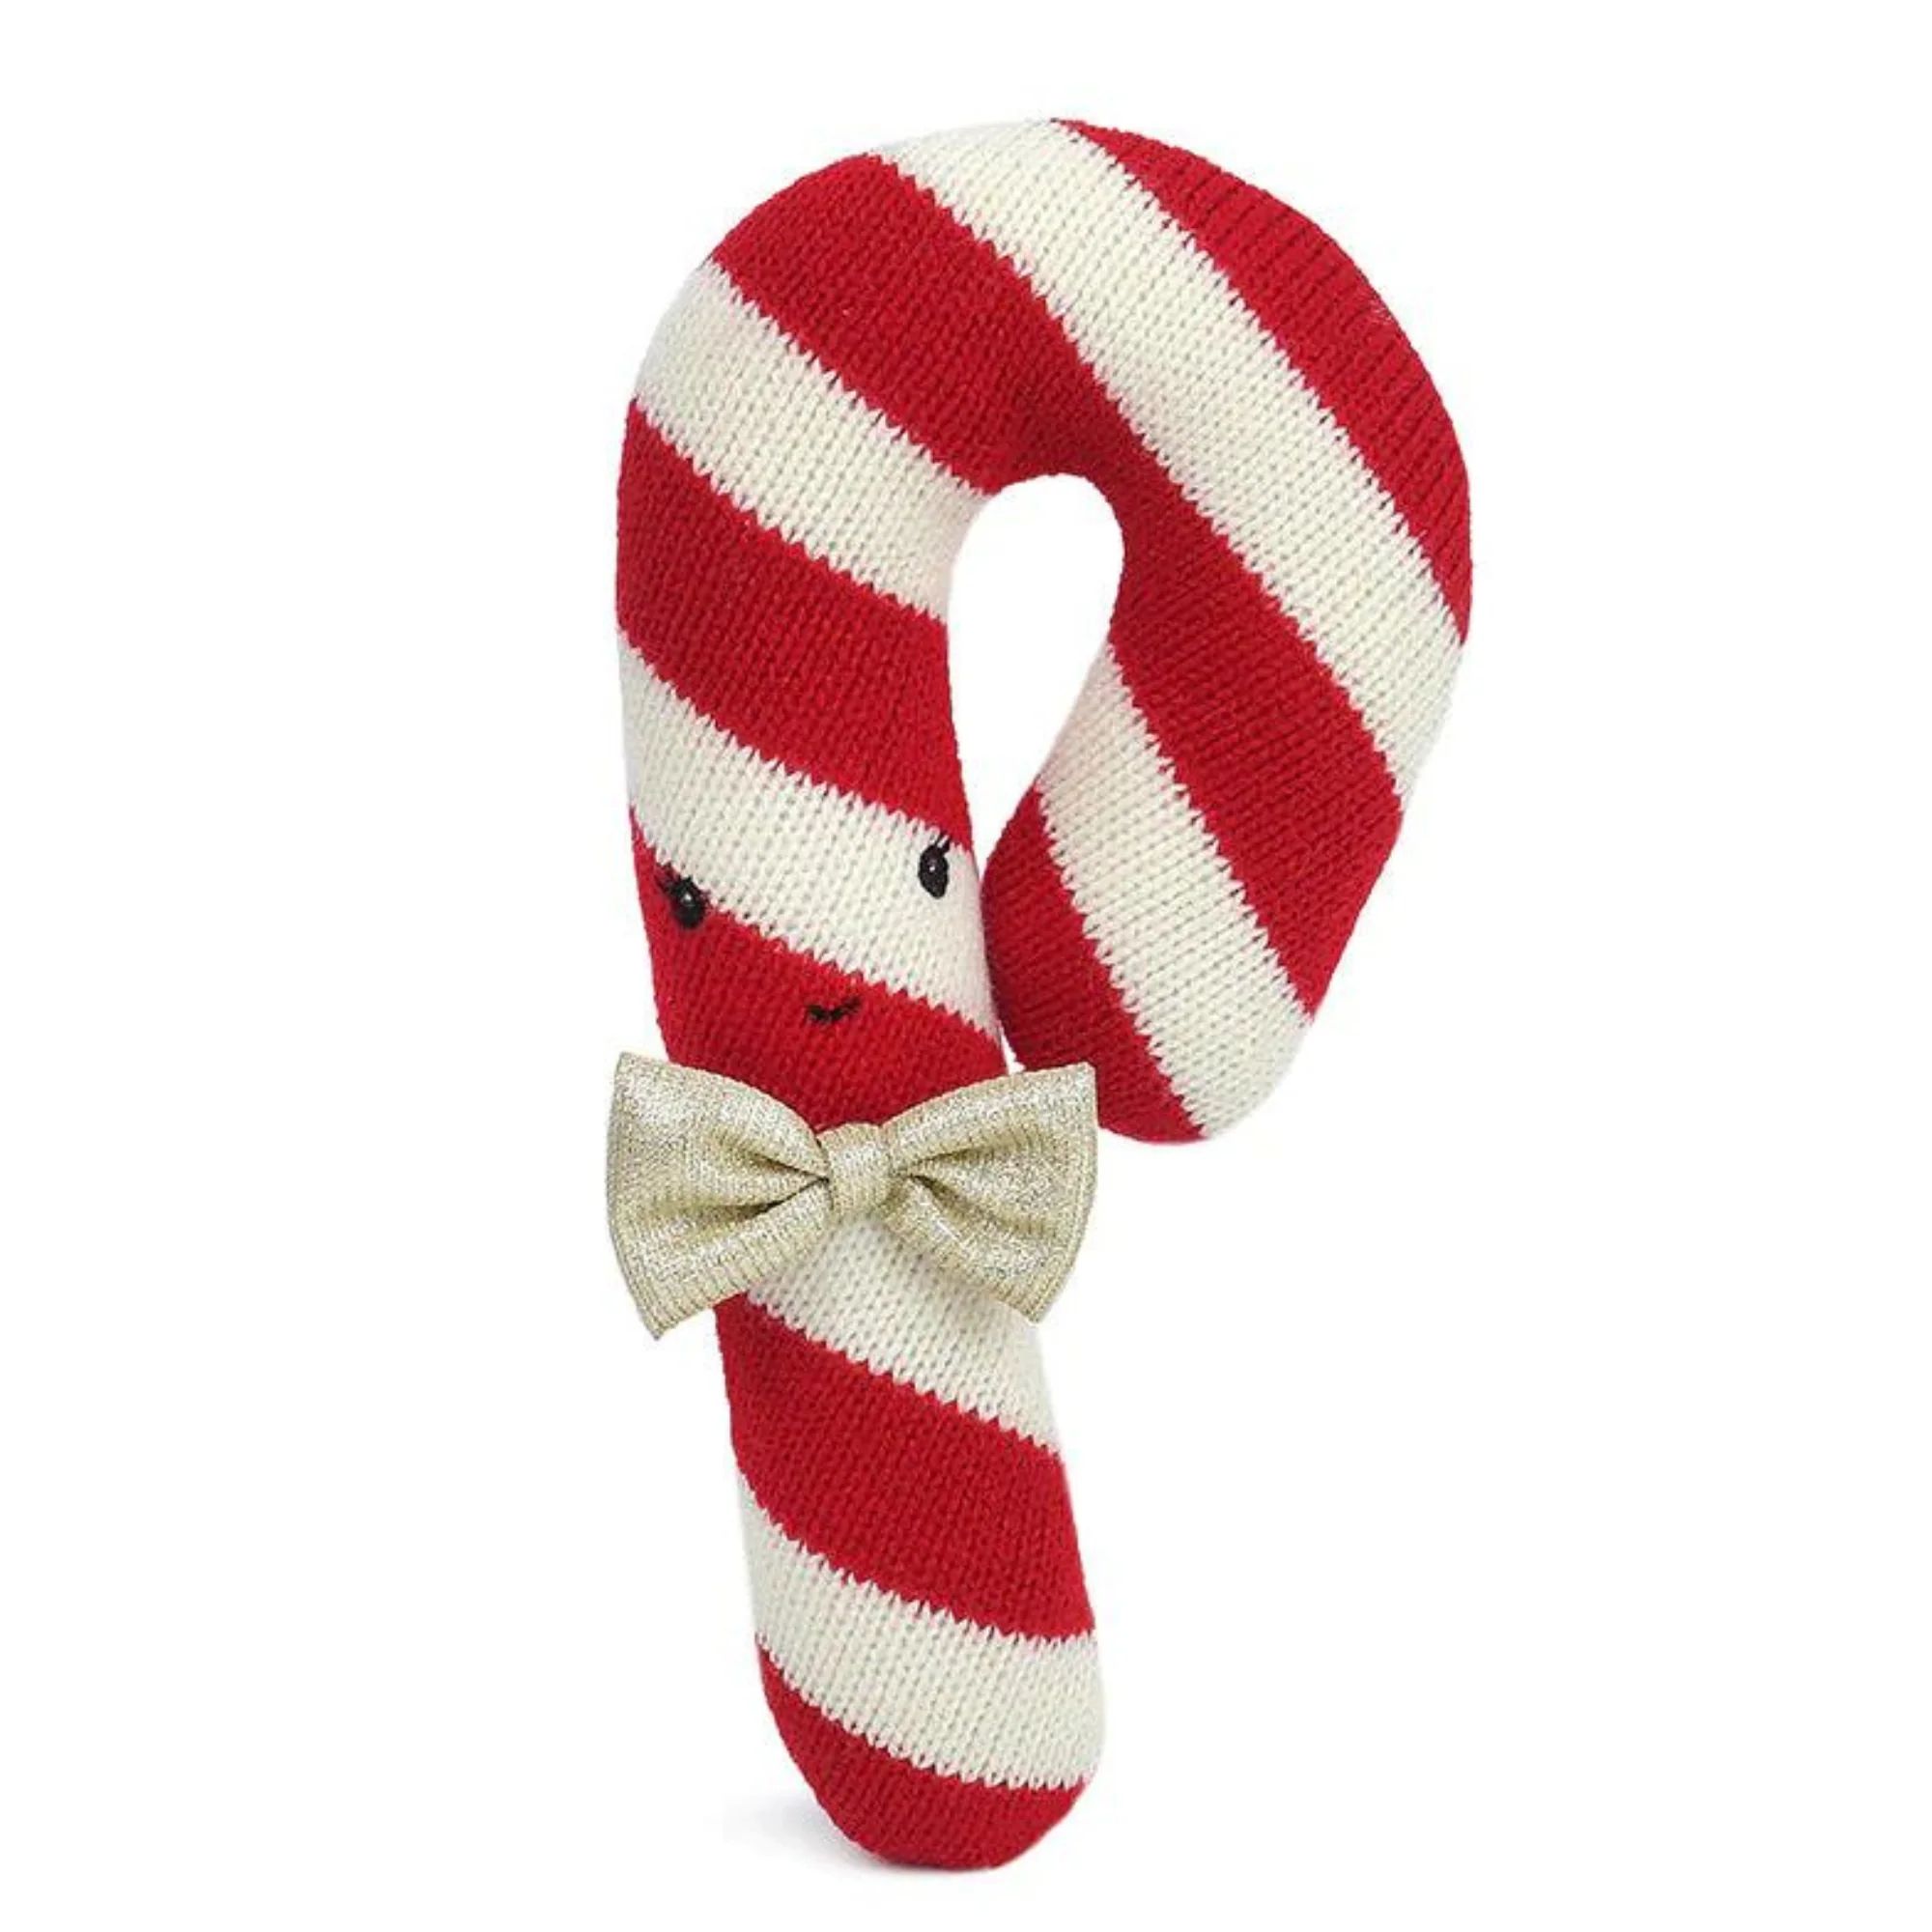 Candy Cane Knit Toy, Red | SpearmintLOVE